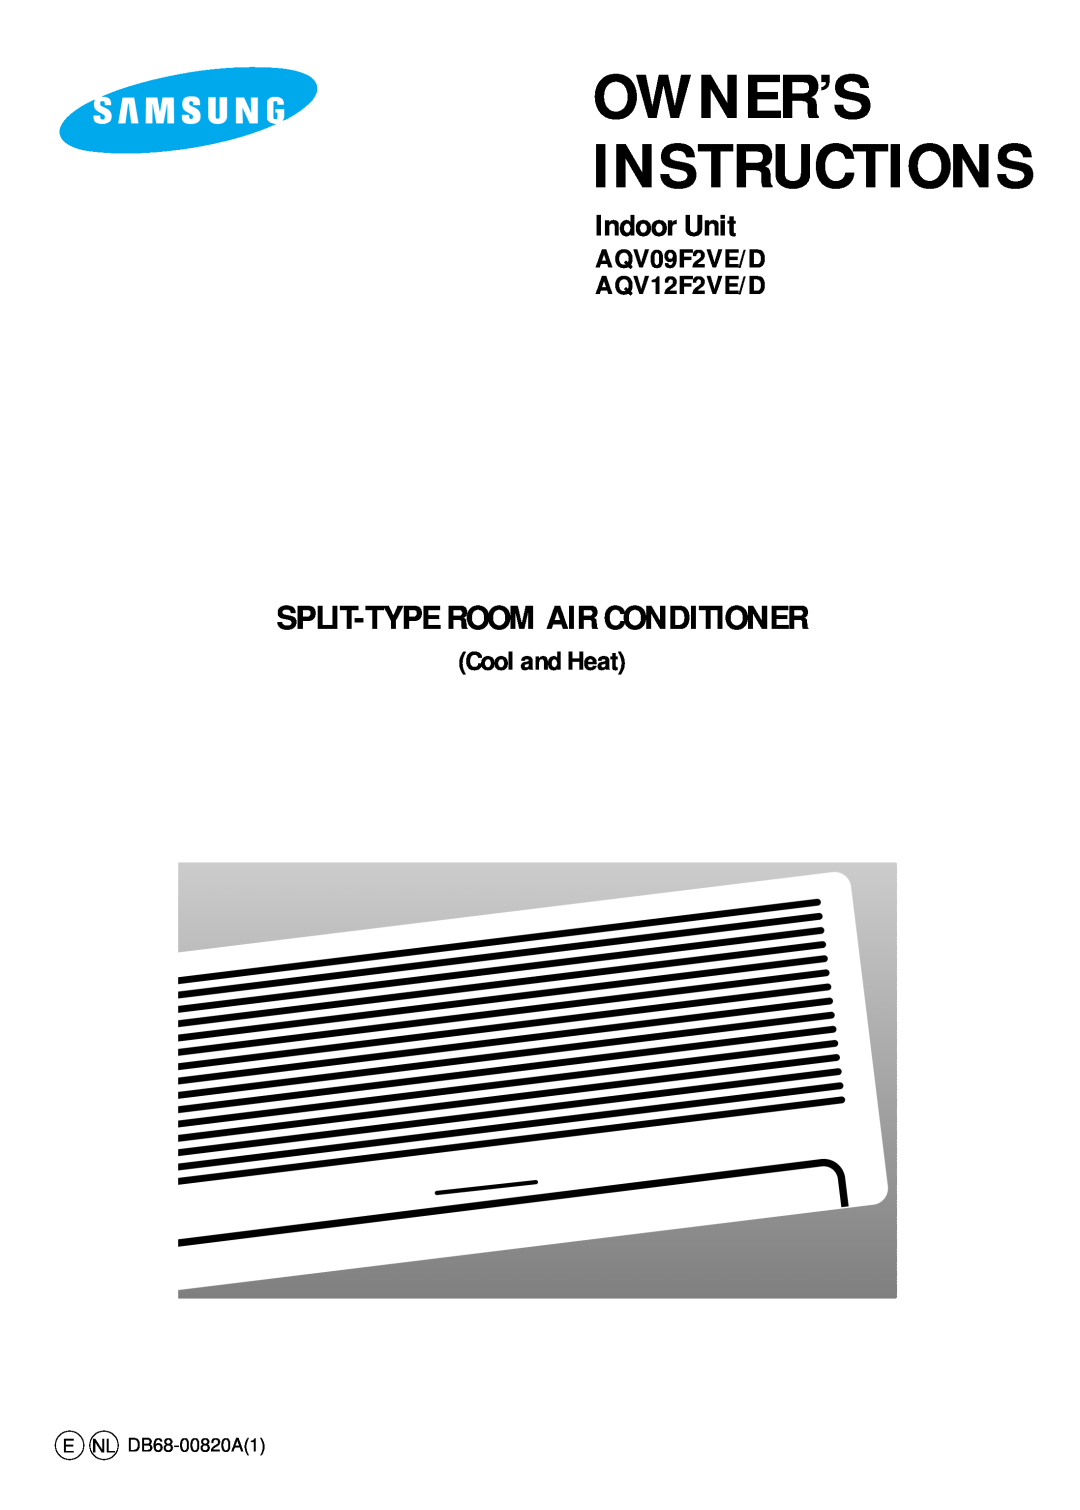 Samsung manual AQV09F2VE/D AQV12F2VE/D, Cool and Heat, Owner’S Instructions, Split-Typeroom Air Conditioner 